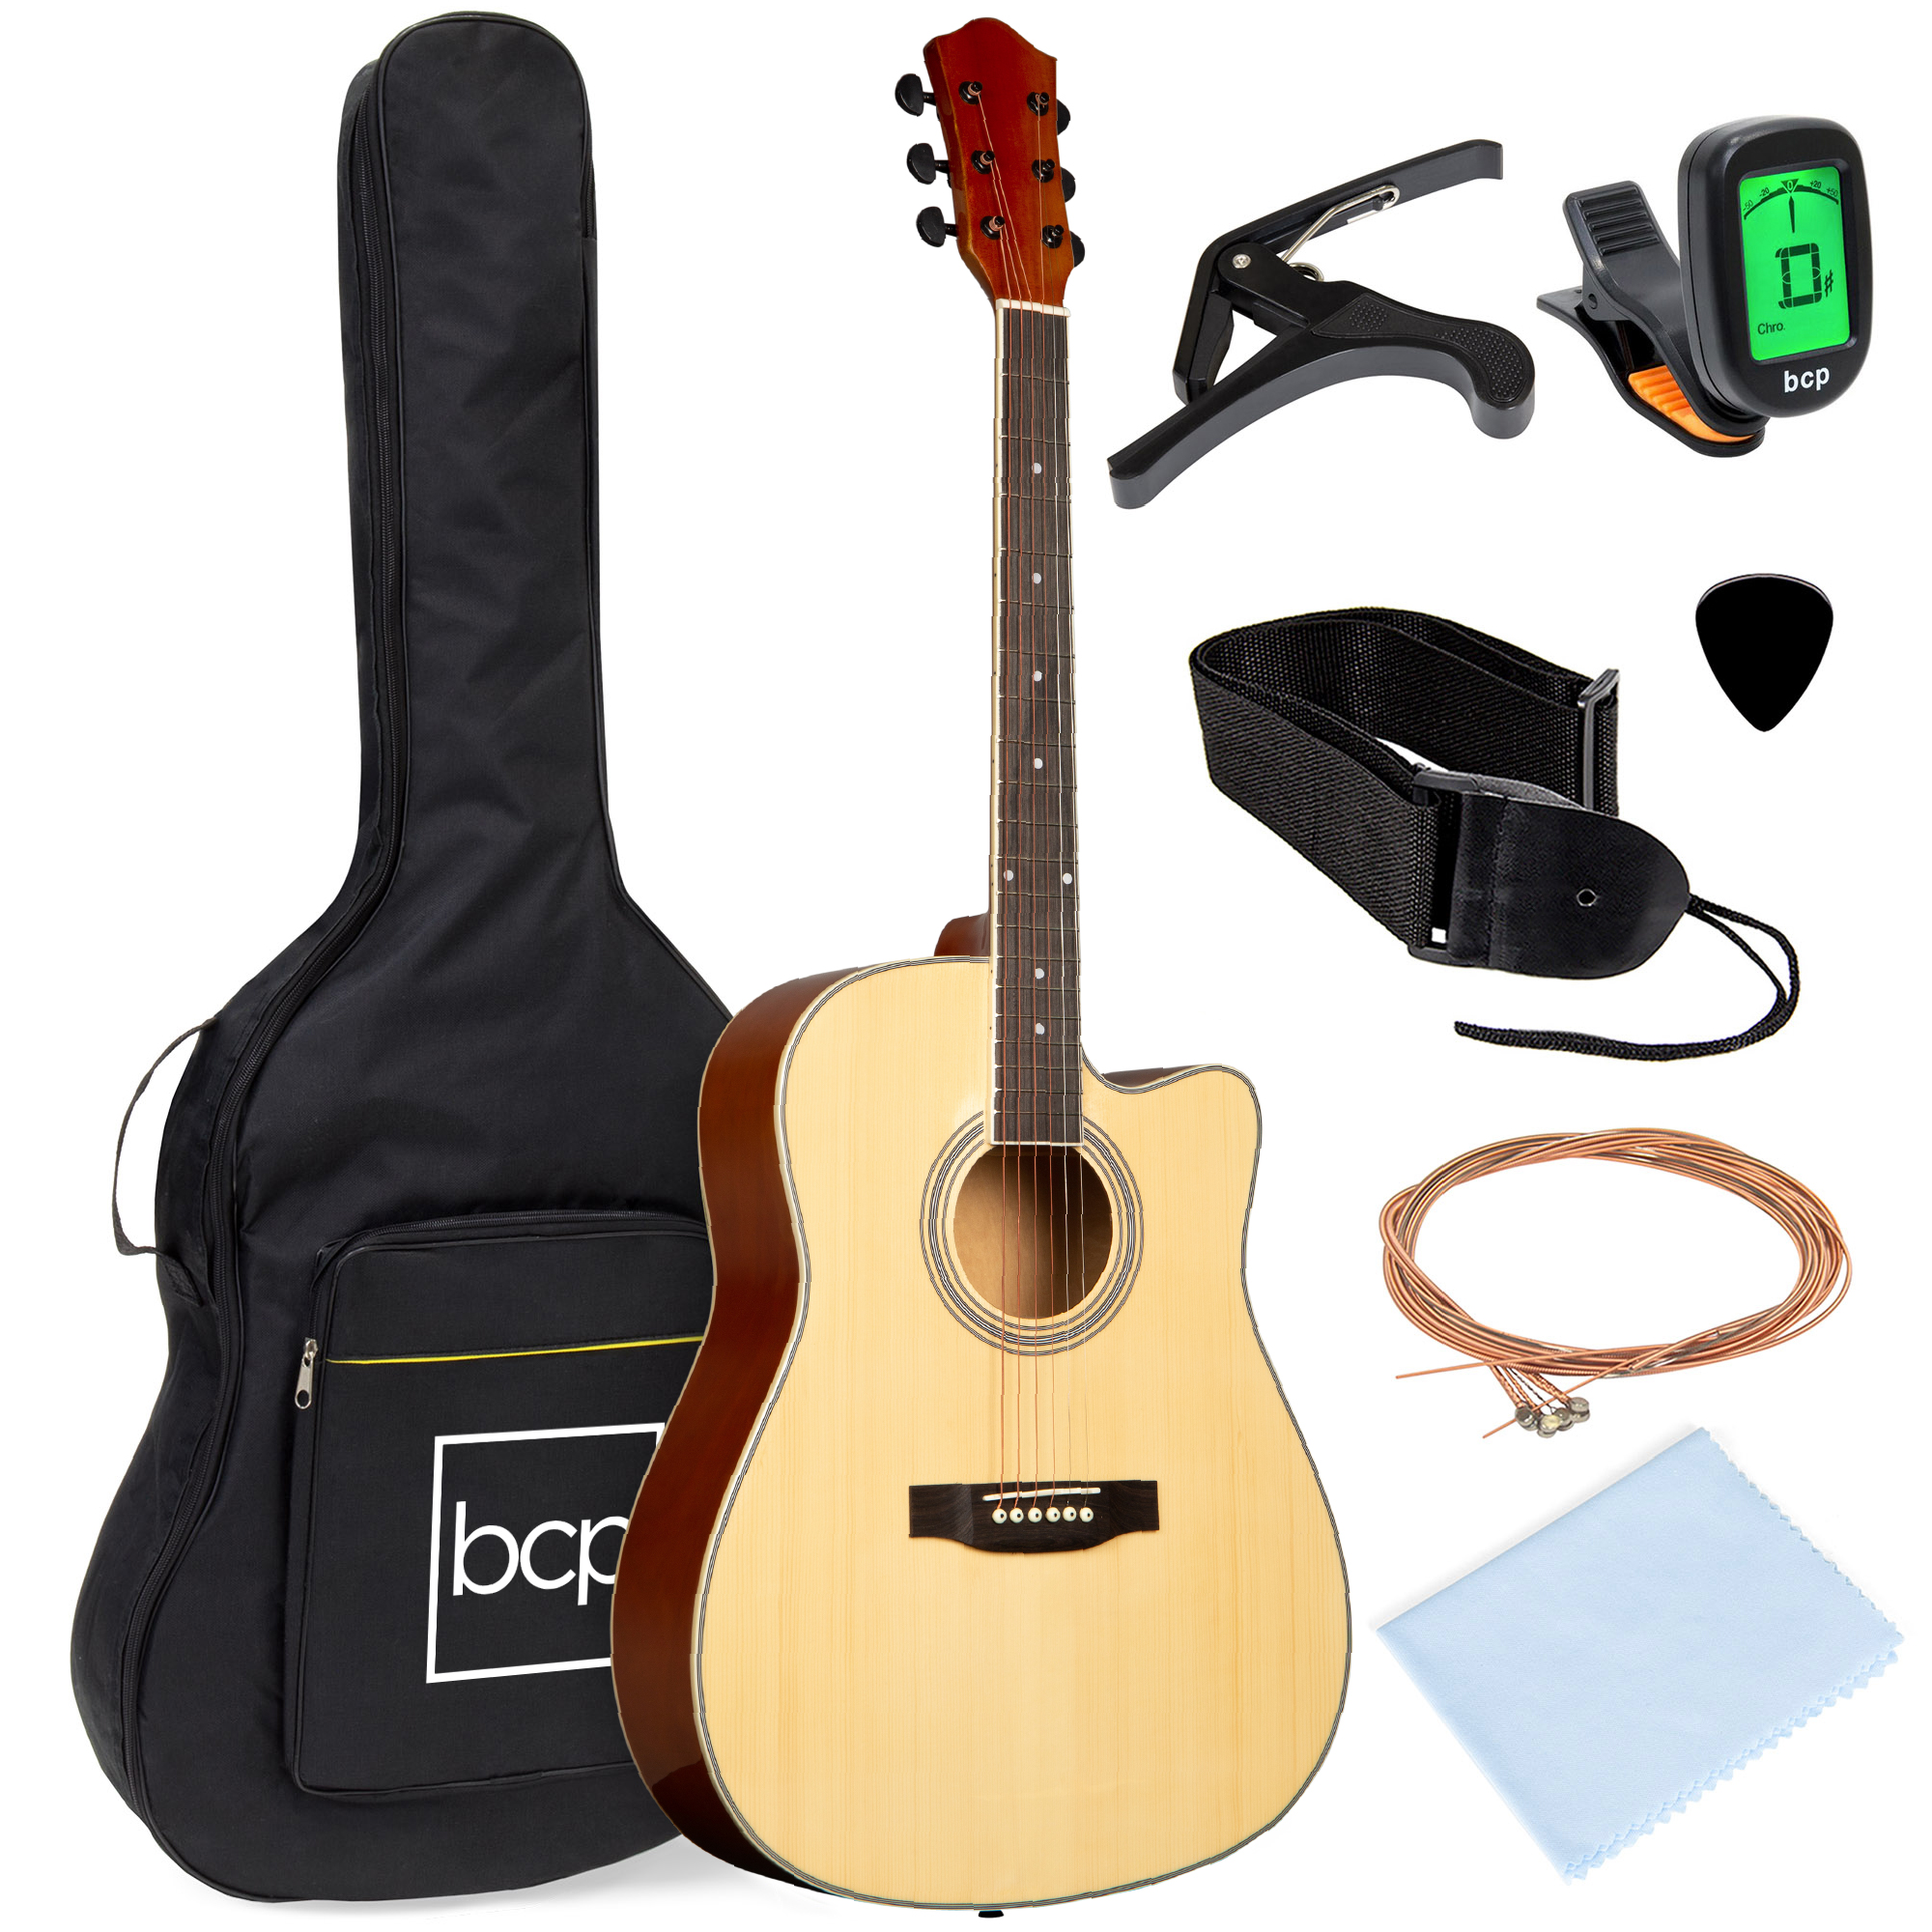 Best Choice Products 41in Full Size Beginner Acoustic Guitar Set with Case, Strap, Capo, Strings, Tuner - Natural - image 1 of 8